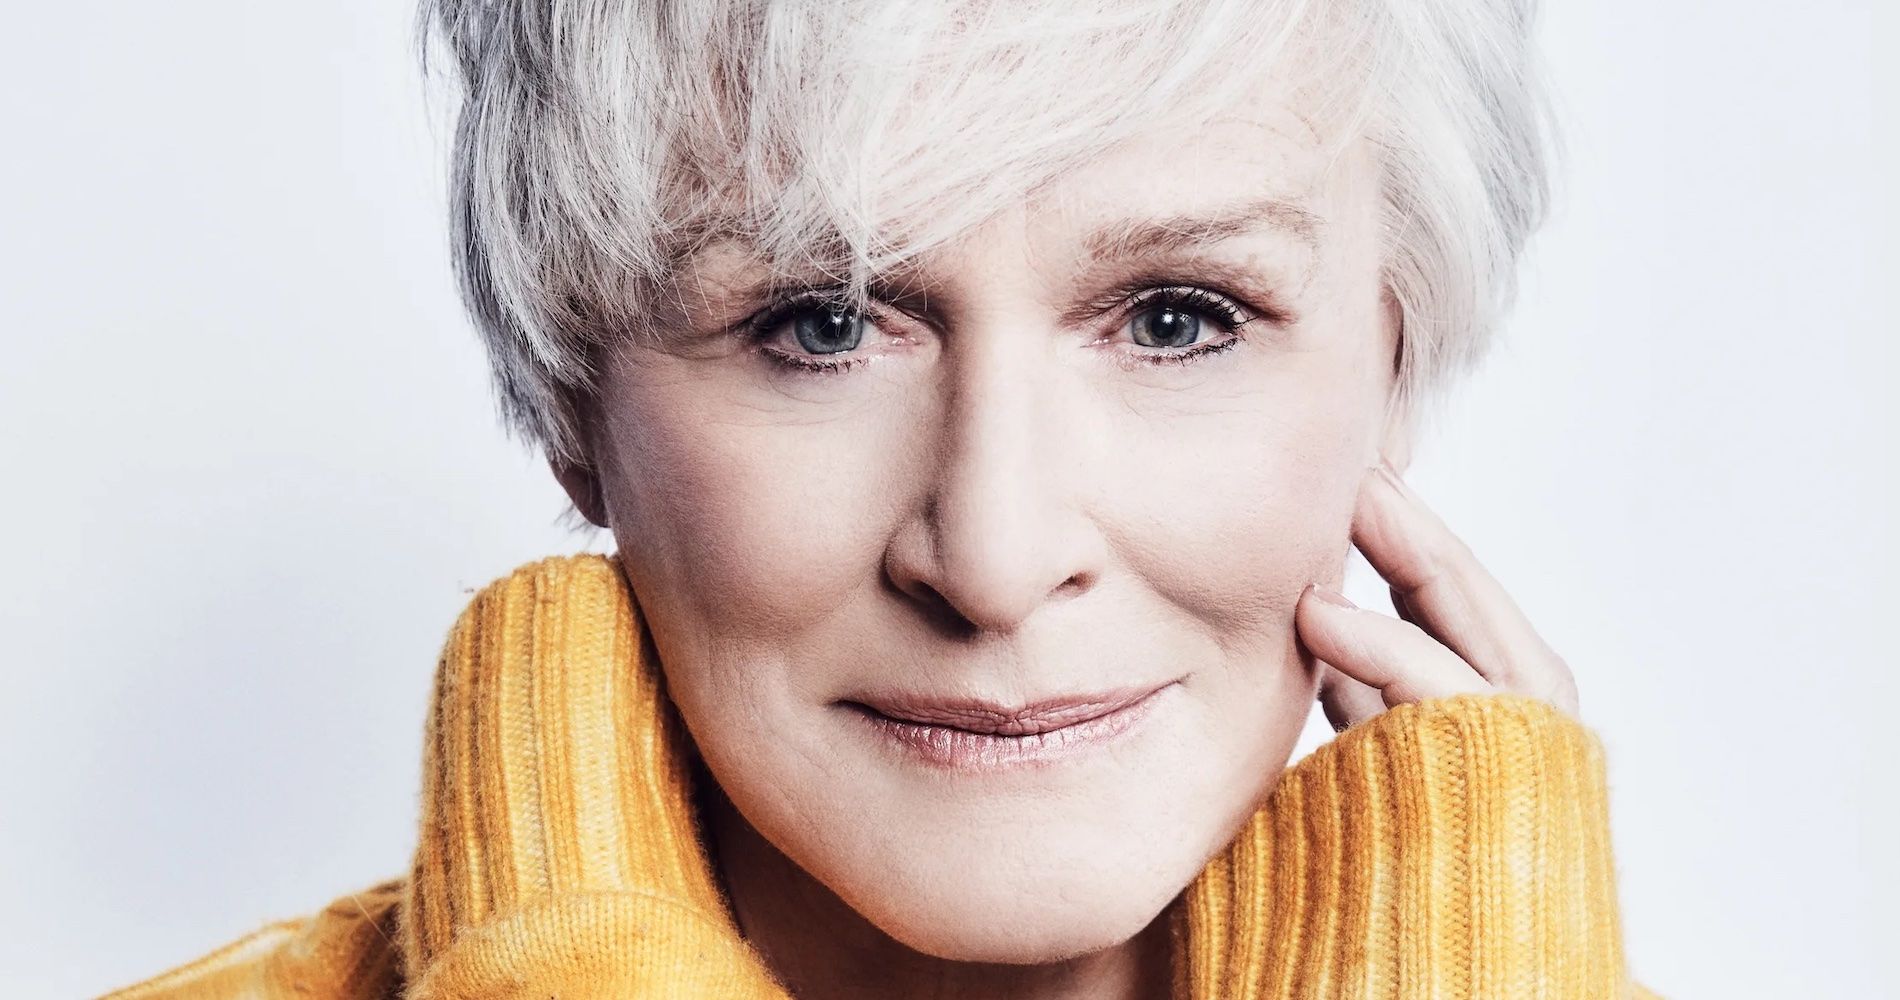 Actress Glenn Close, 75, Bucks Beauty Standards and Shares Why We Get More and More Interesting As We Age